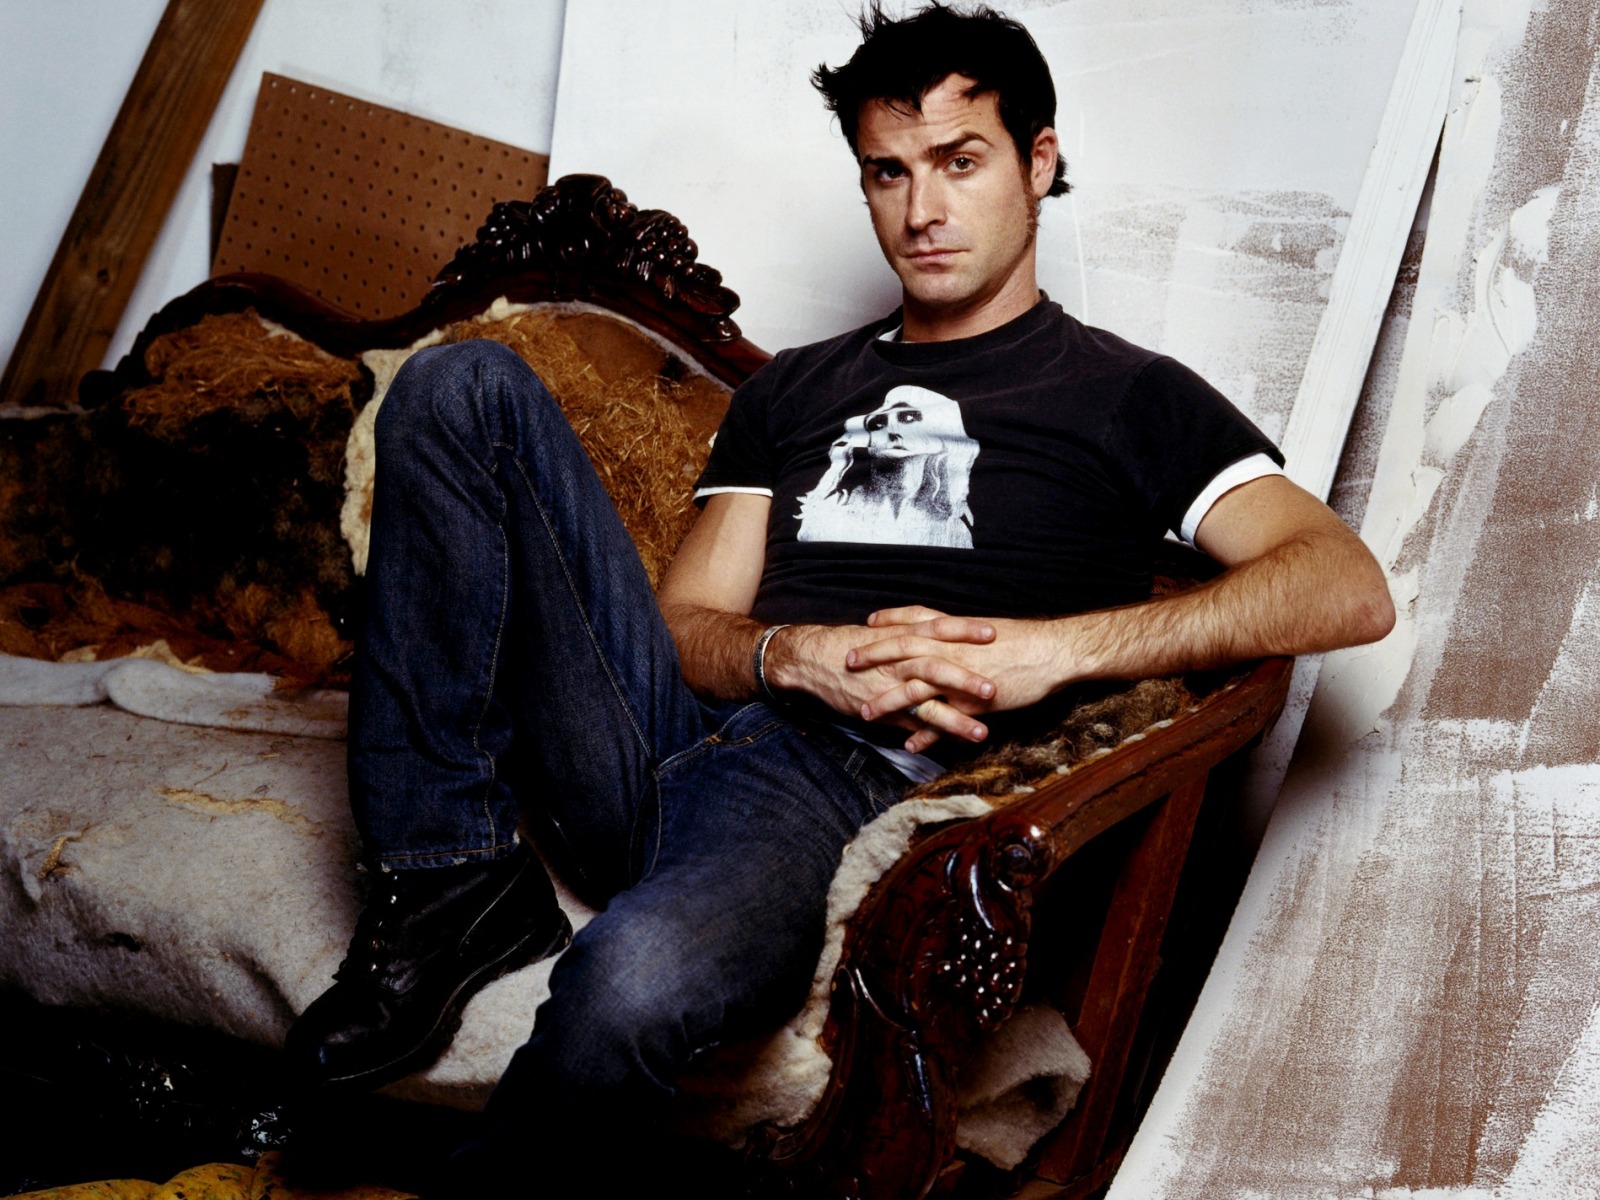 Justin Theroux Image HD Wallpaper And Background